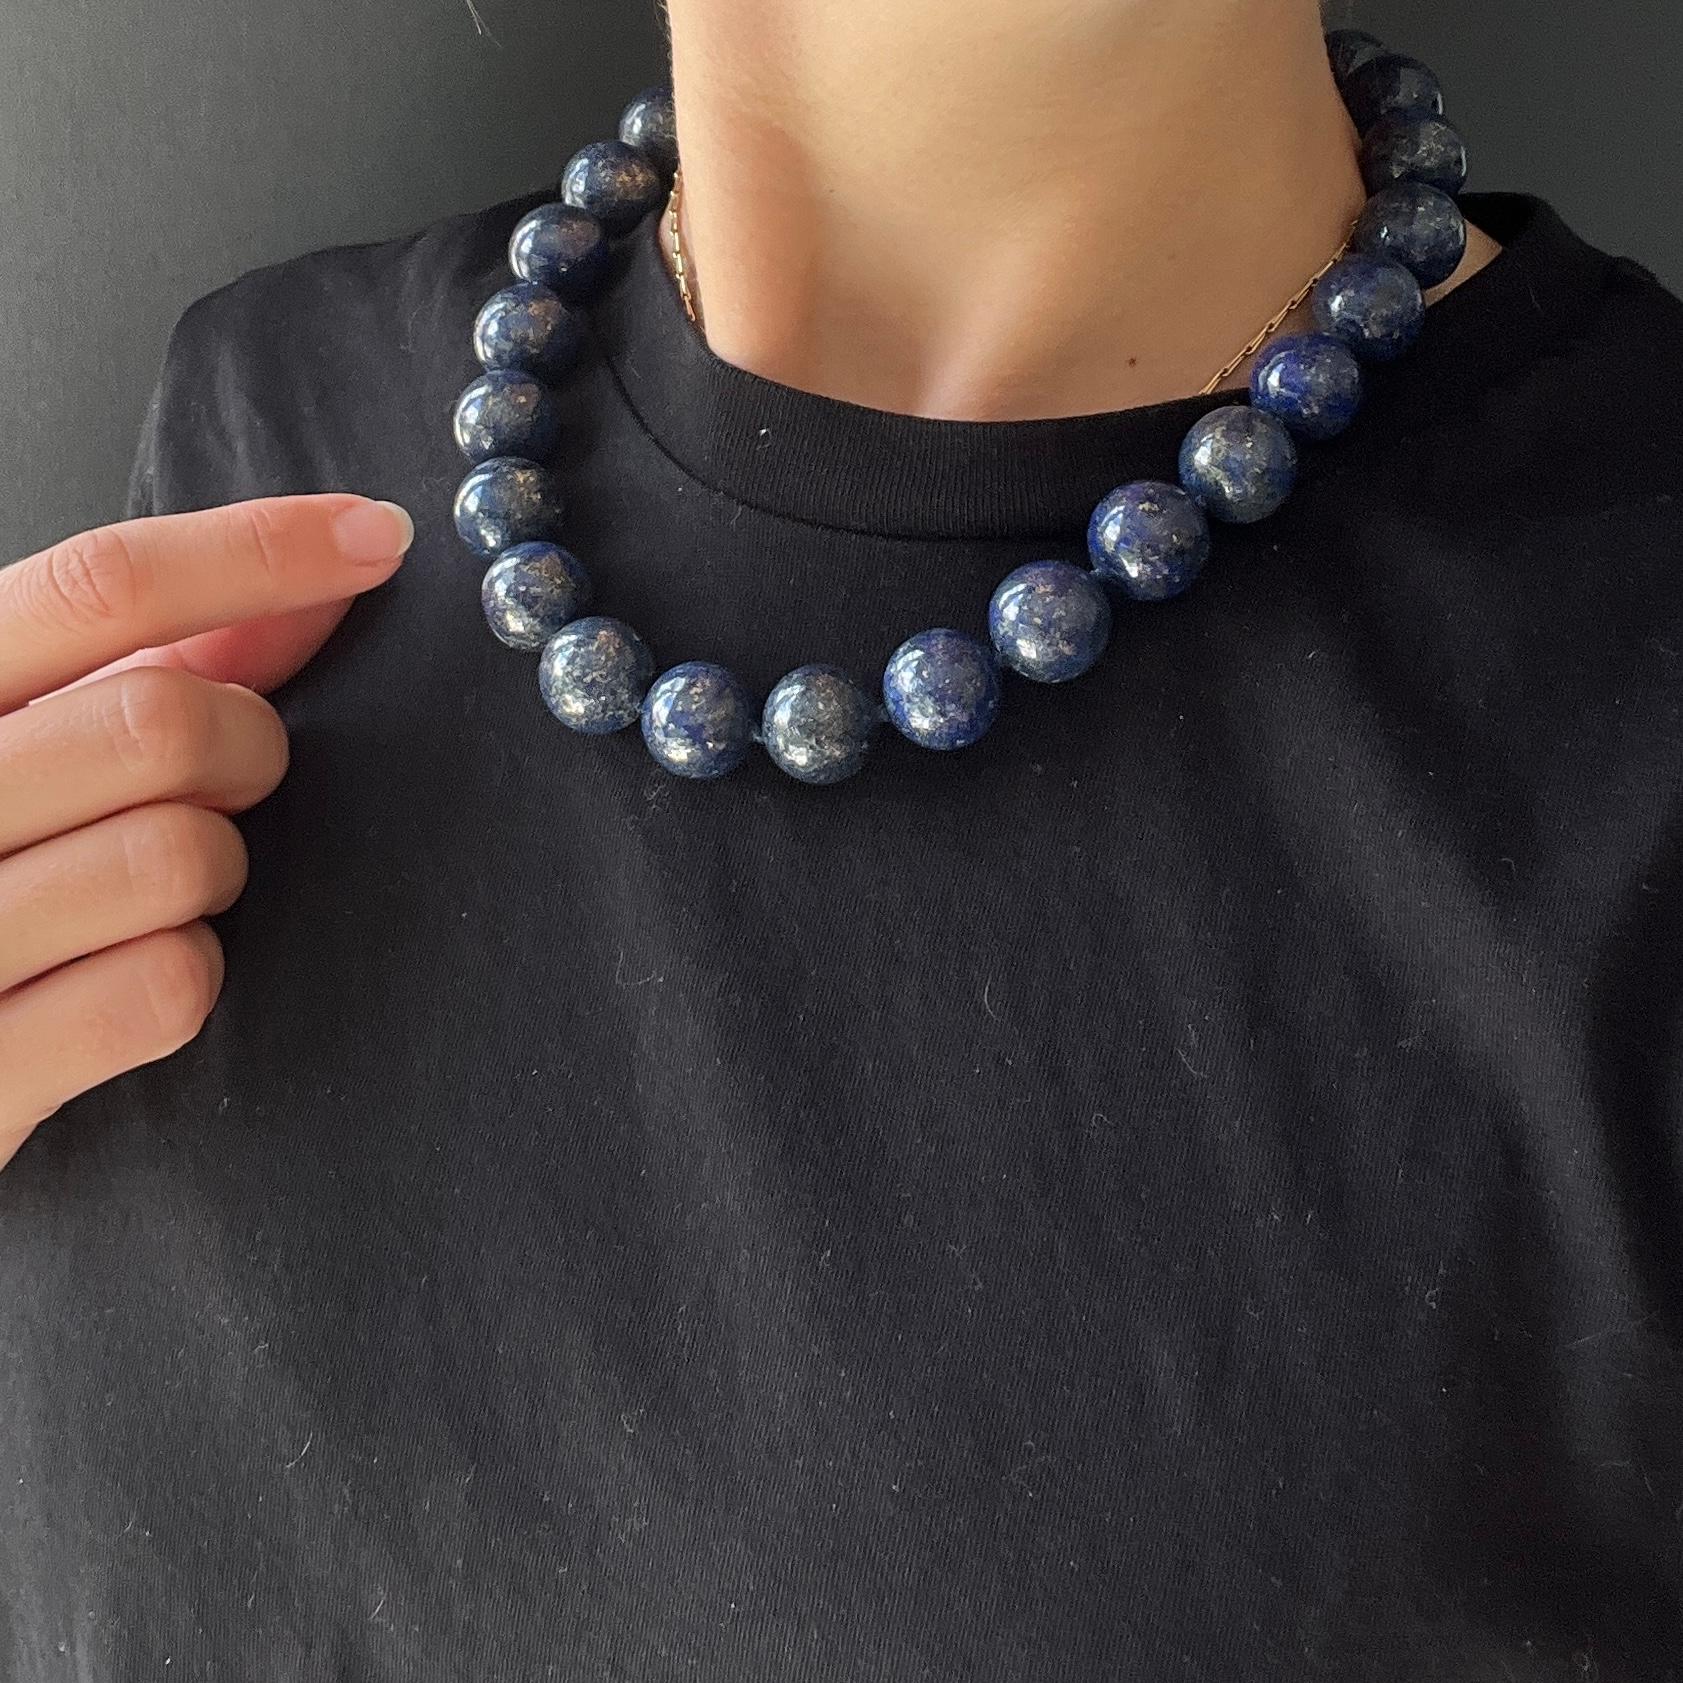 The blue of the gorgeous lapis stone beads really pop in this necklace. The beads are all the same size and the necklace is fastened using a giant bolt clasp. 

Length: 46cm
Bead Diameter: 16mm

Weight: 168g